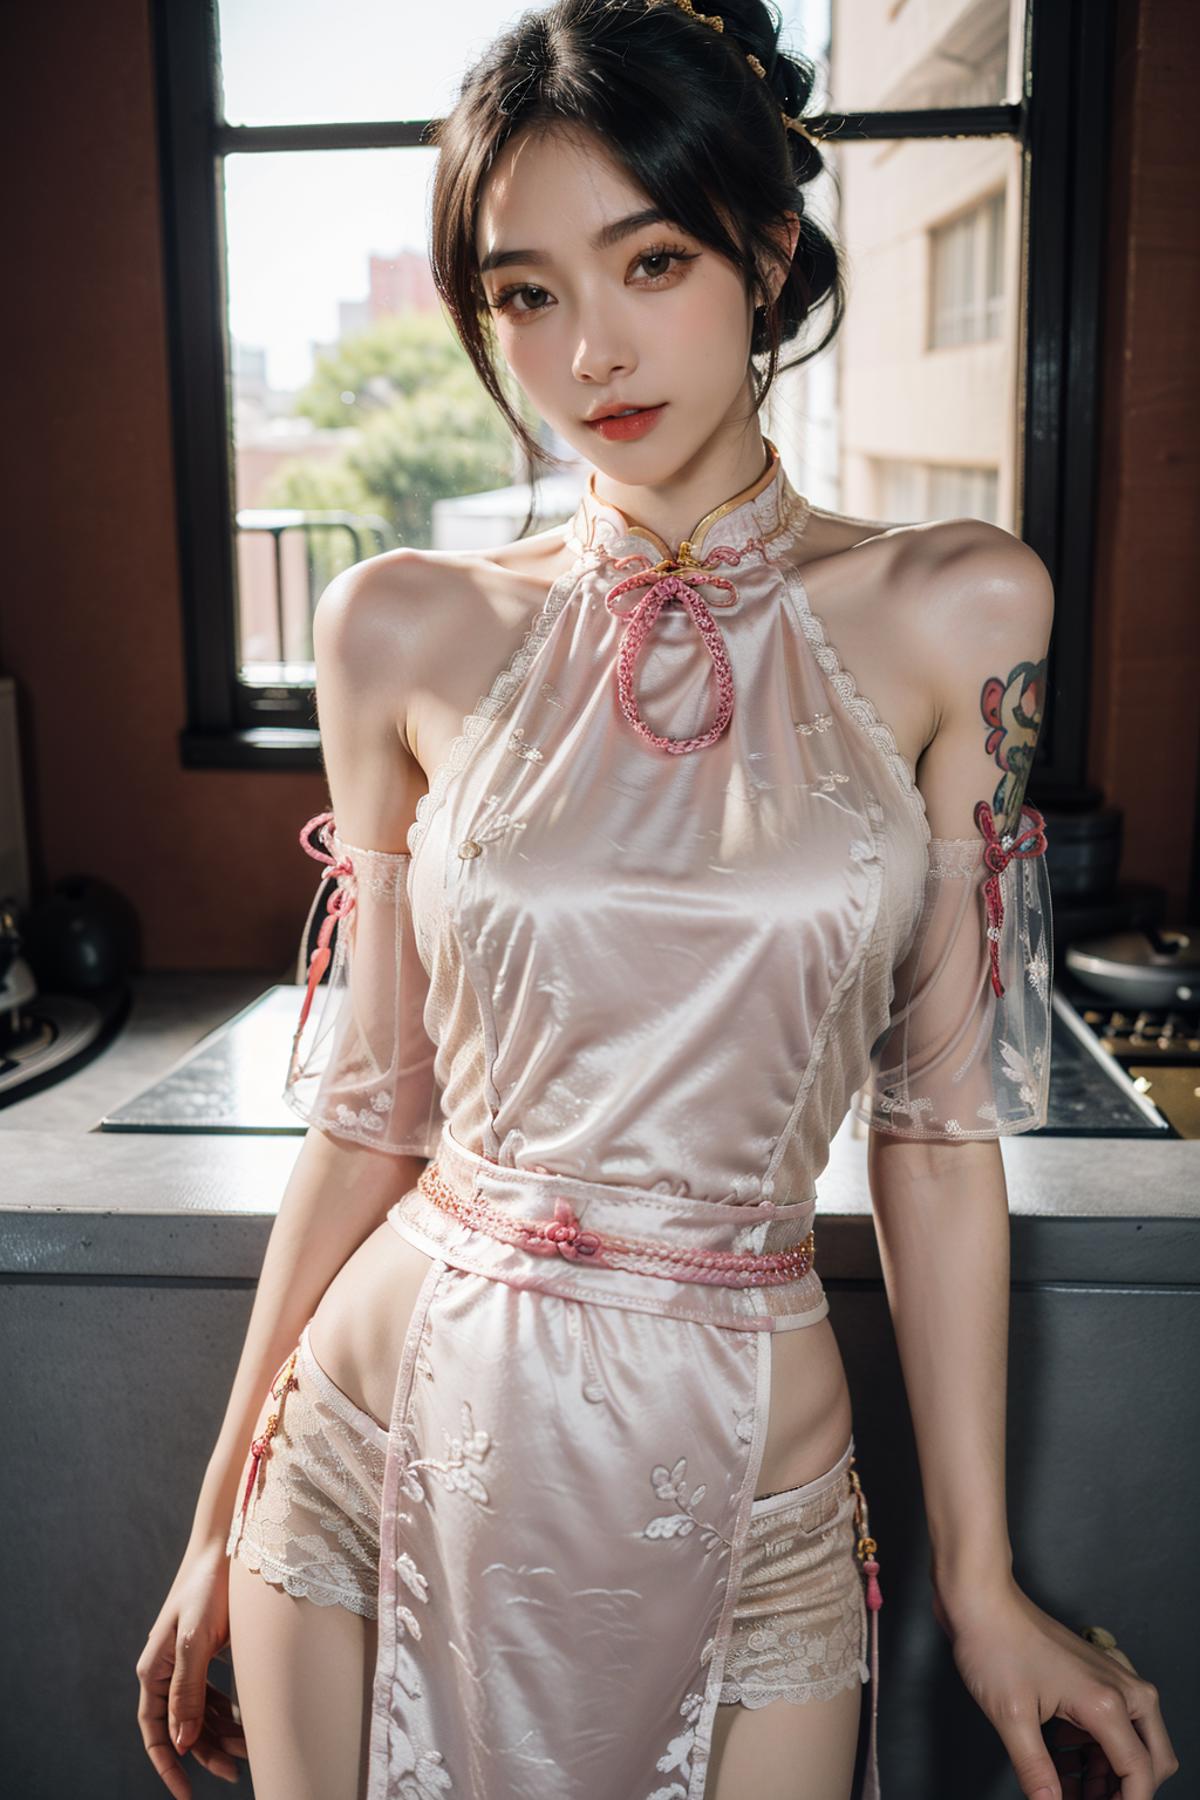 Traditional Chinese sexy outfit|古风情趣内衣 image by ssugar008